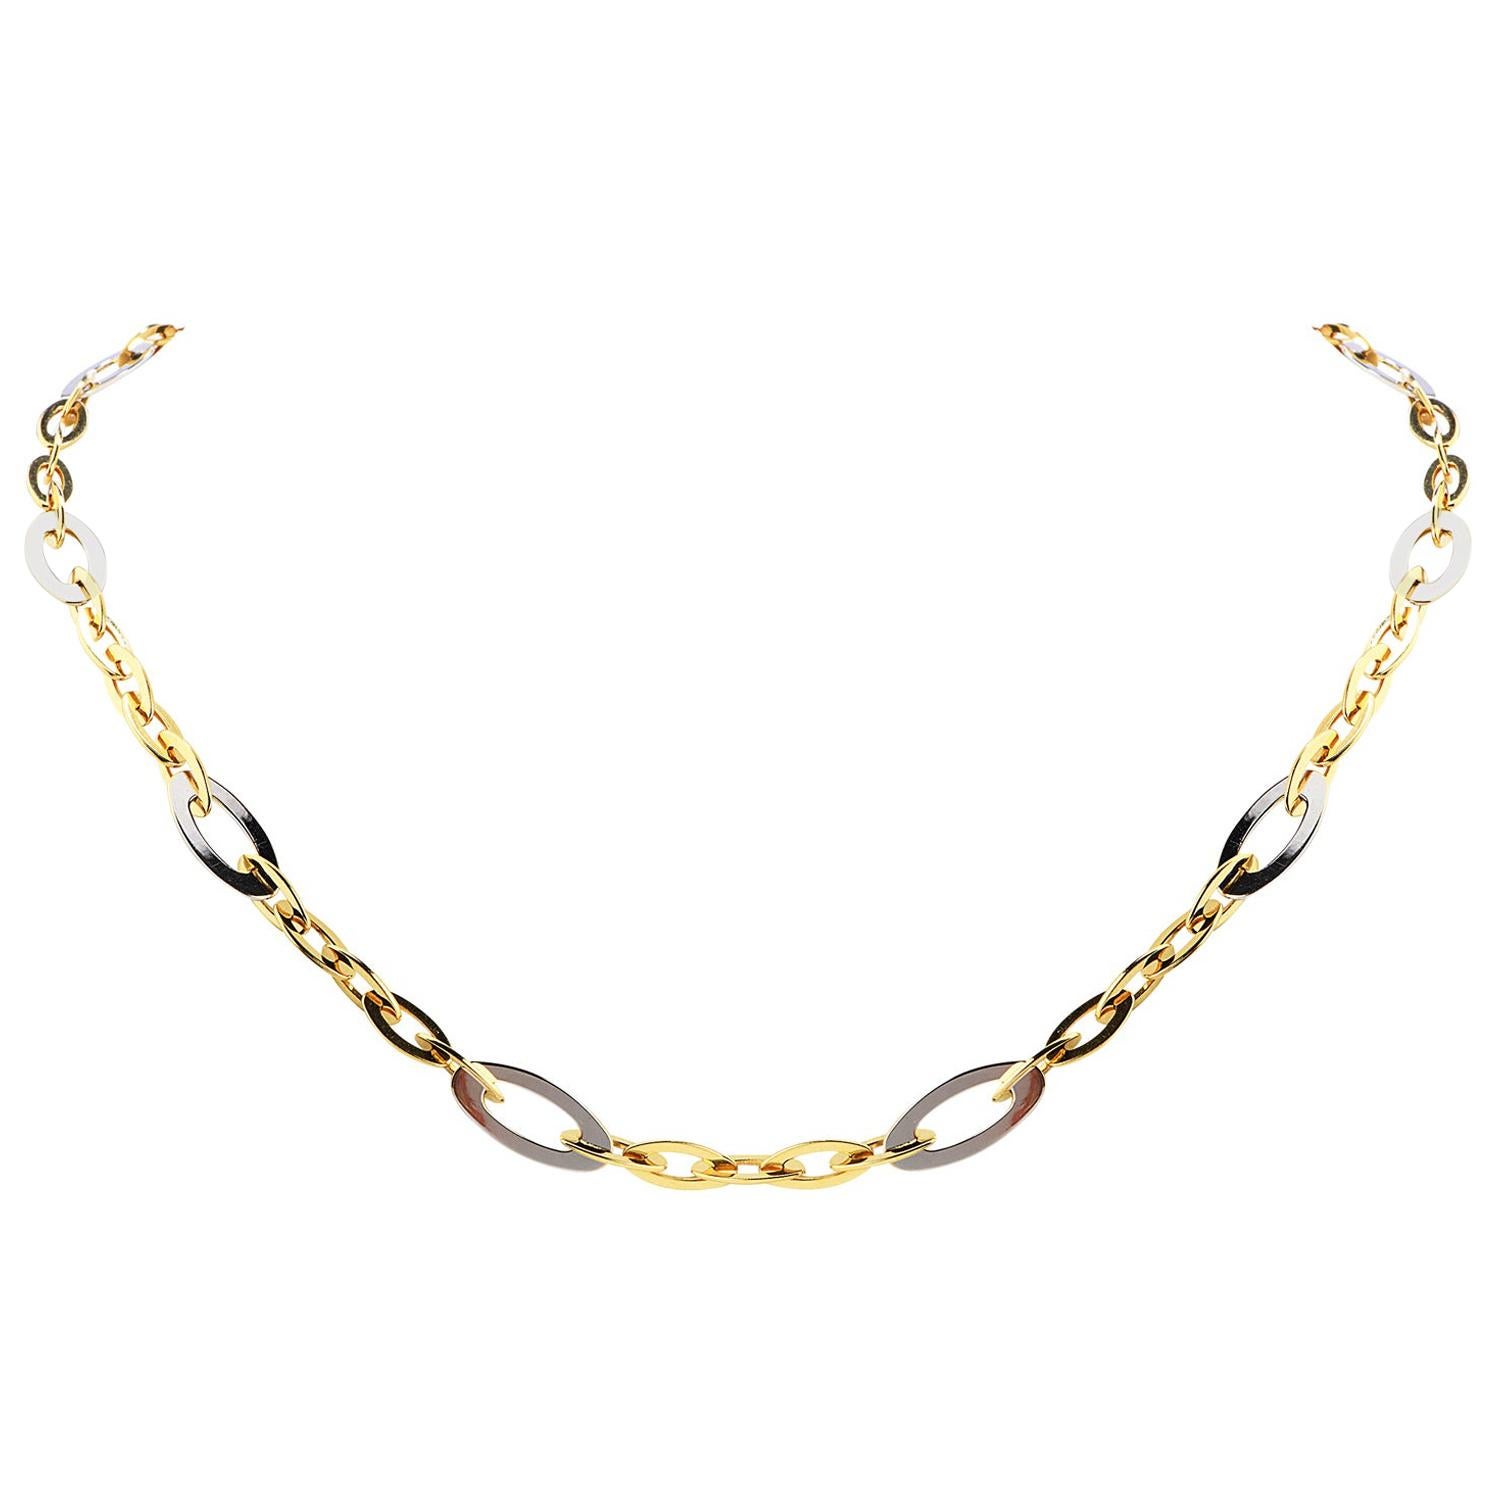 Roberto Coin Chic and Shine Chain 18 Karat Gold Link Necklace